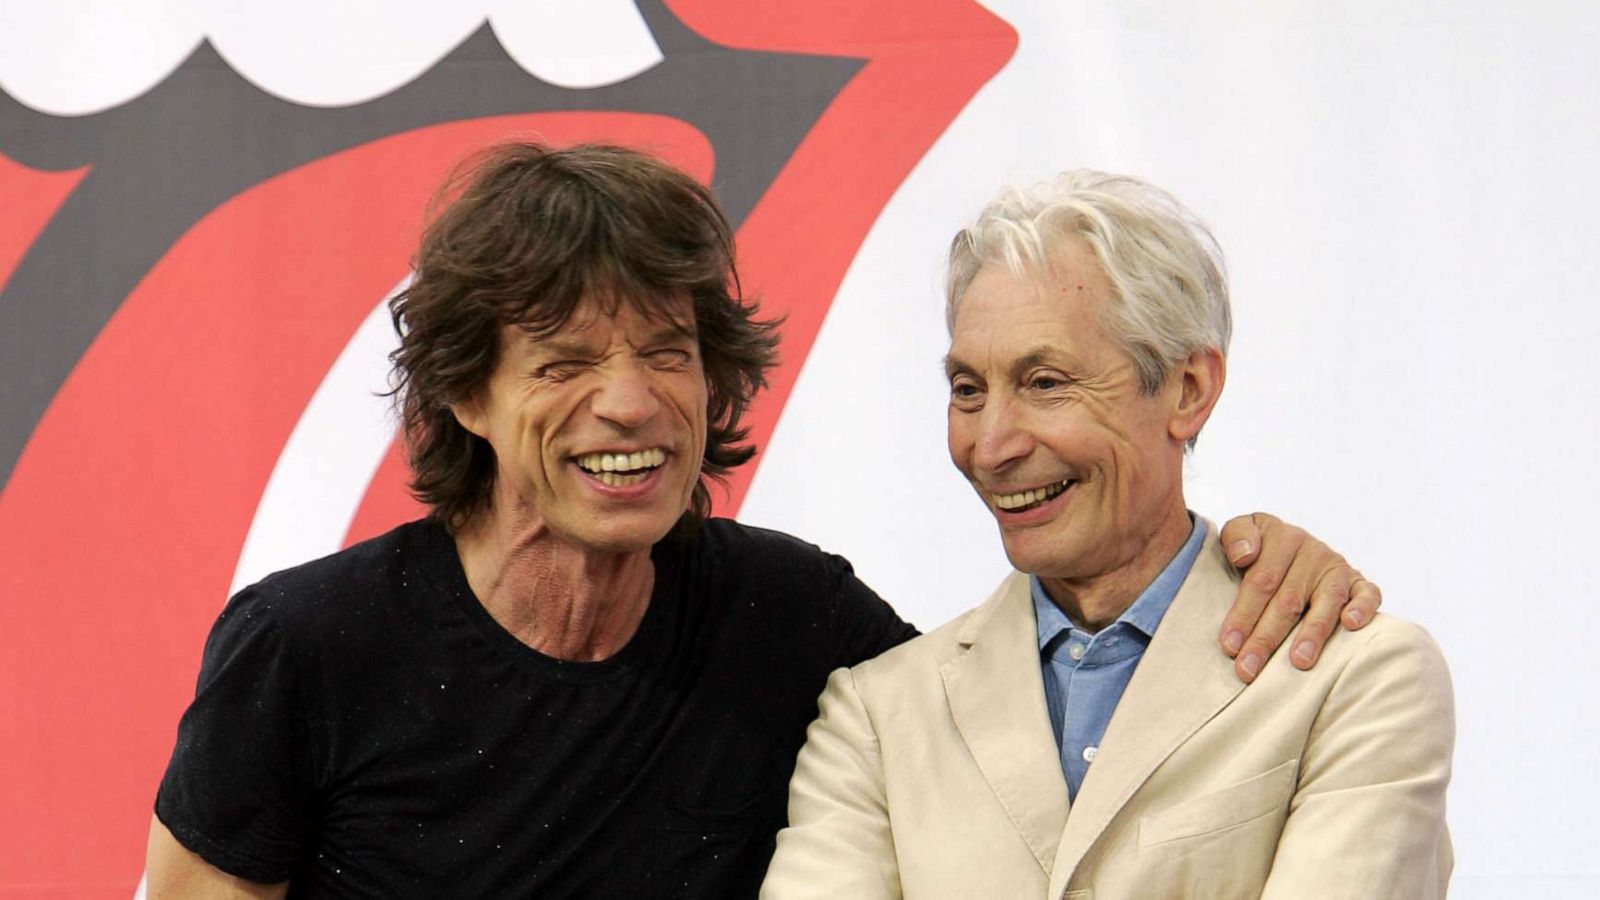 Mick Jagger emotional\' dedicates Stones - Watts: America \'I\'m concert Rolling Charlie to Good all Morning